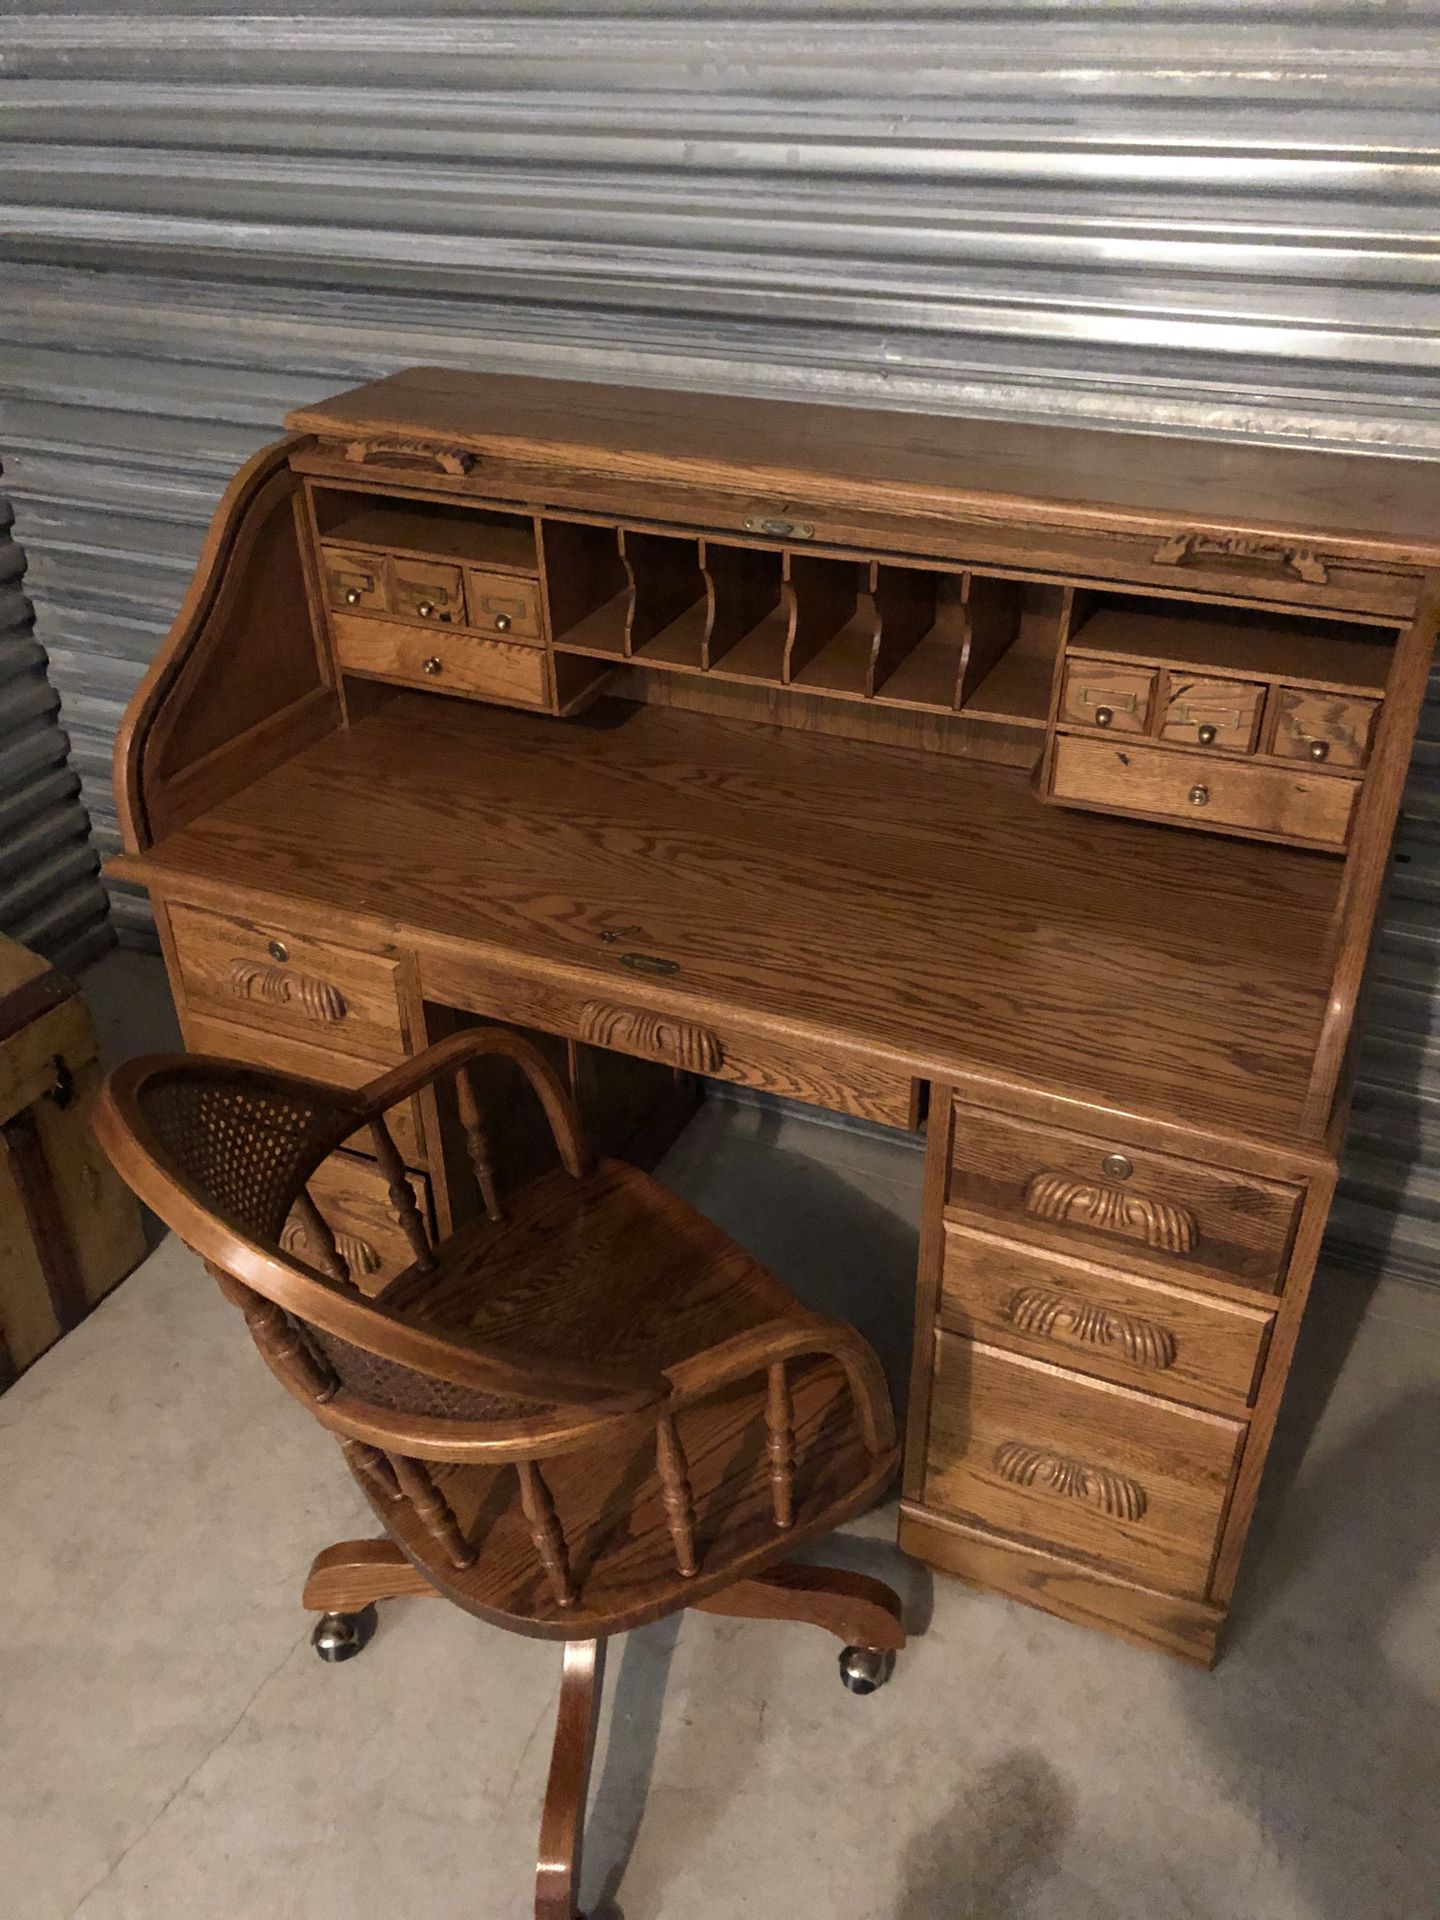 Roll Top Desk and Chair